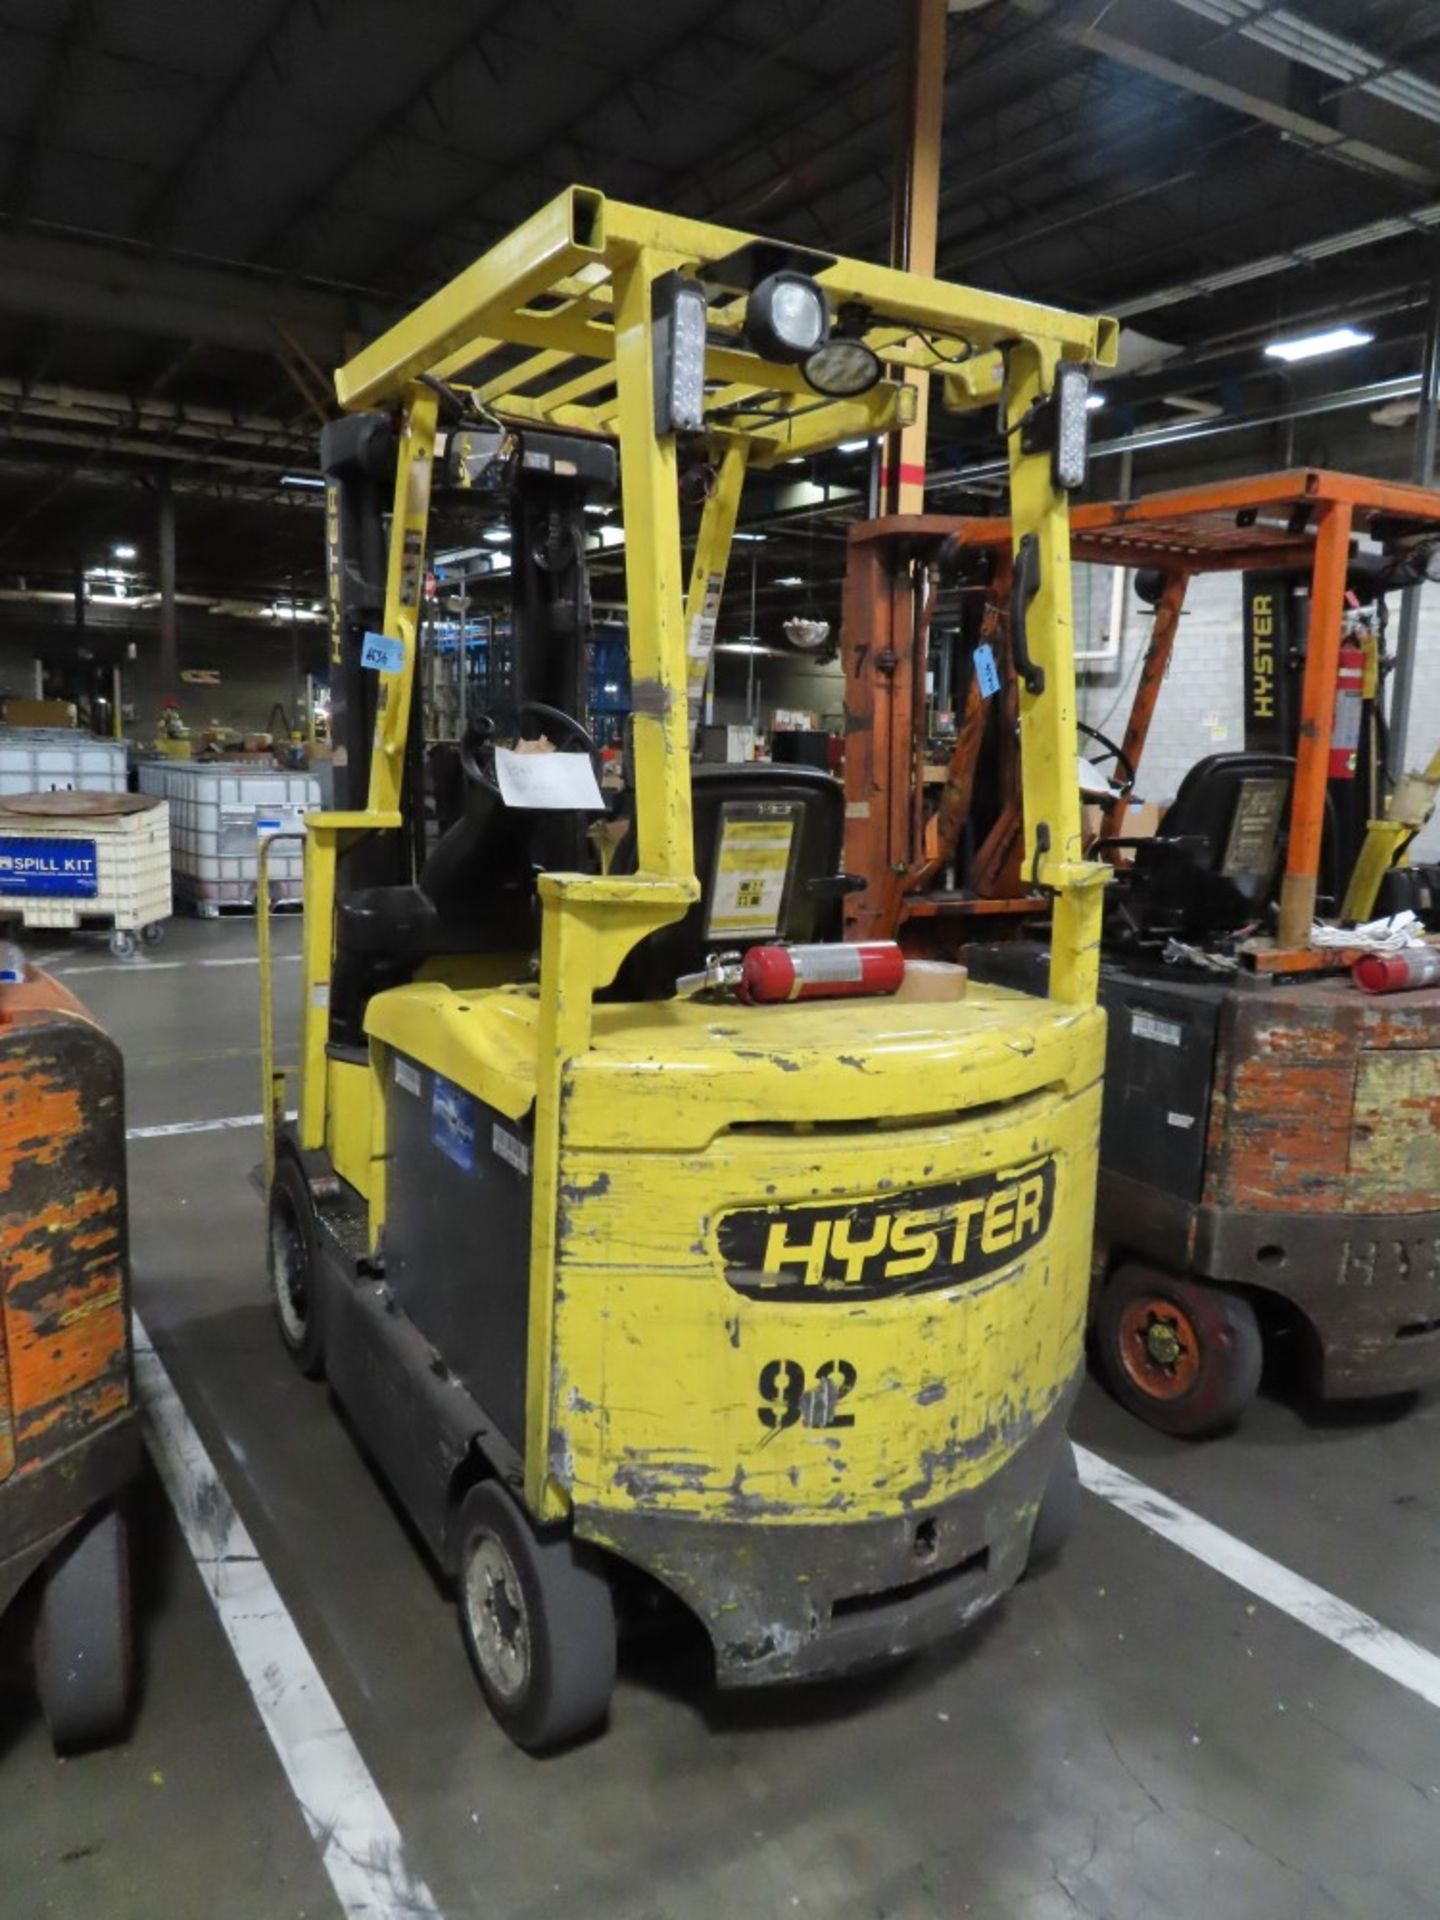 HYSTER MDL. E50XN-33 4,800LB. CAPACITY ELECTRIC FORKLIFT TRUCK - Image 2 of 6